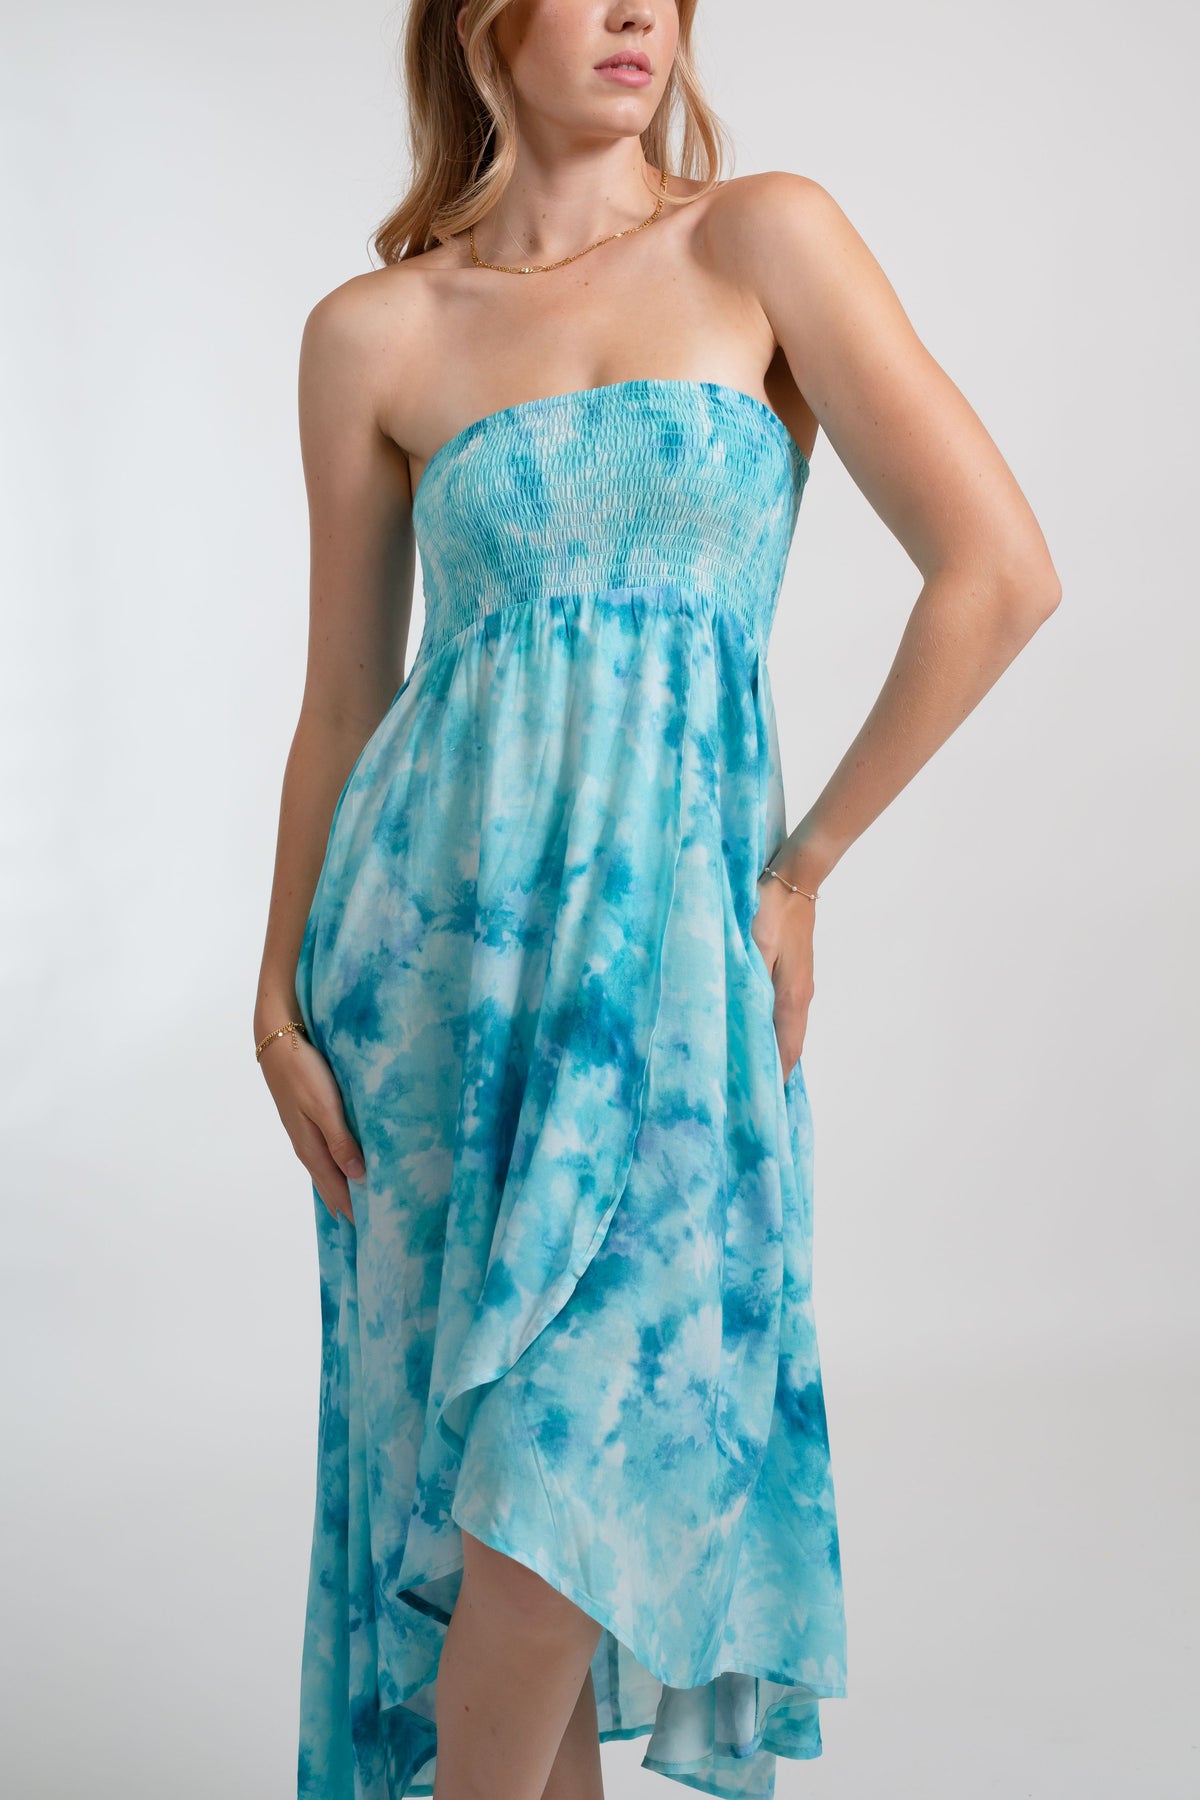 a woman wearing a blue tie-dye bandeau dress which also works as a beach cover up